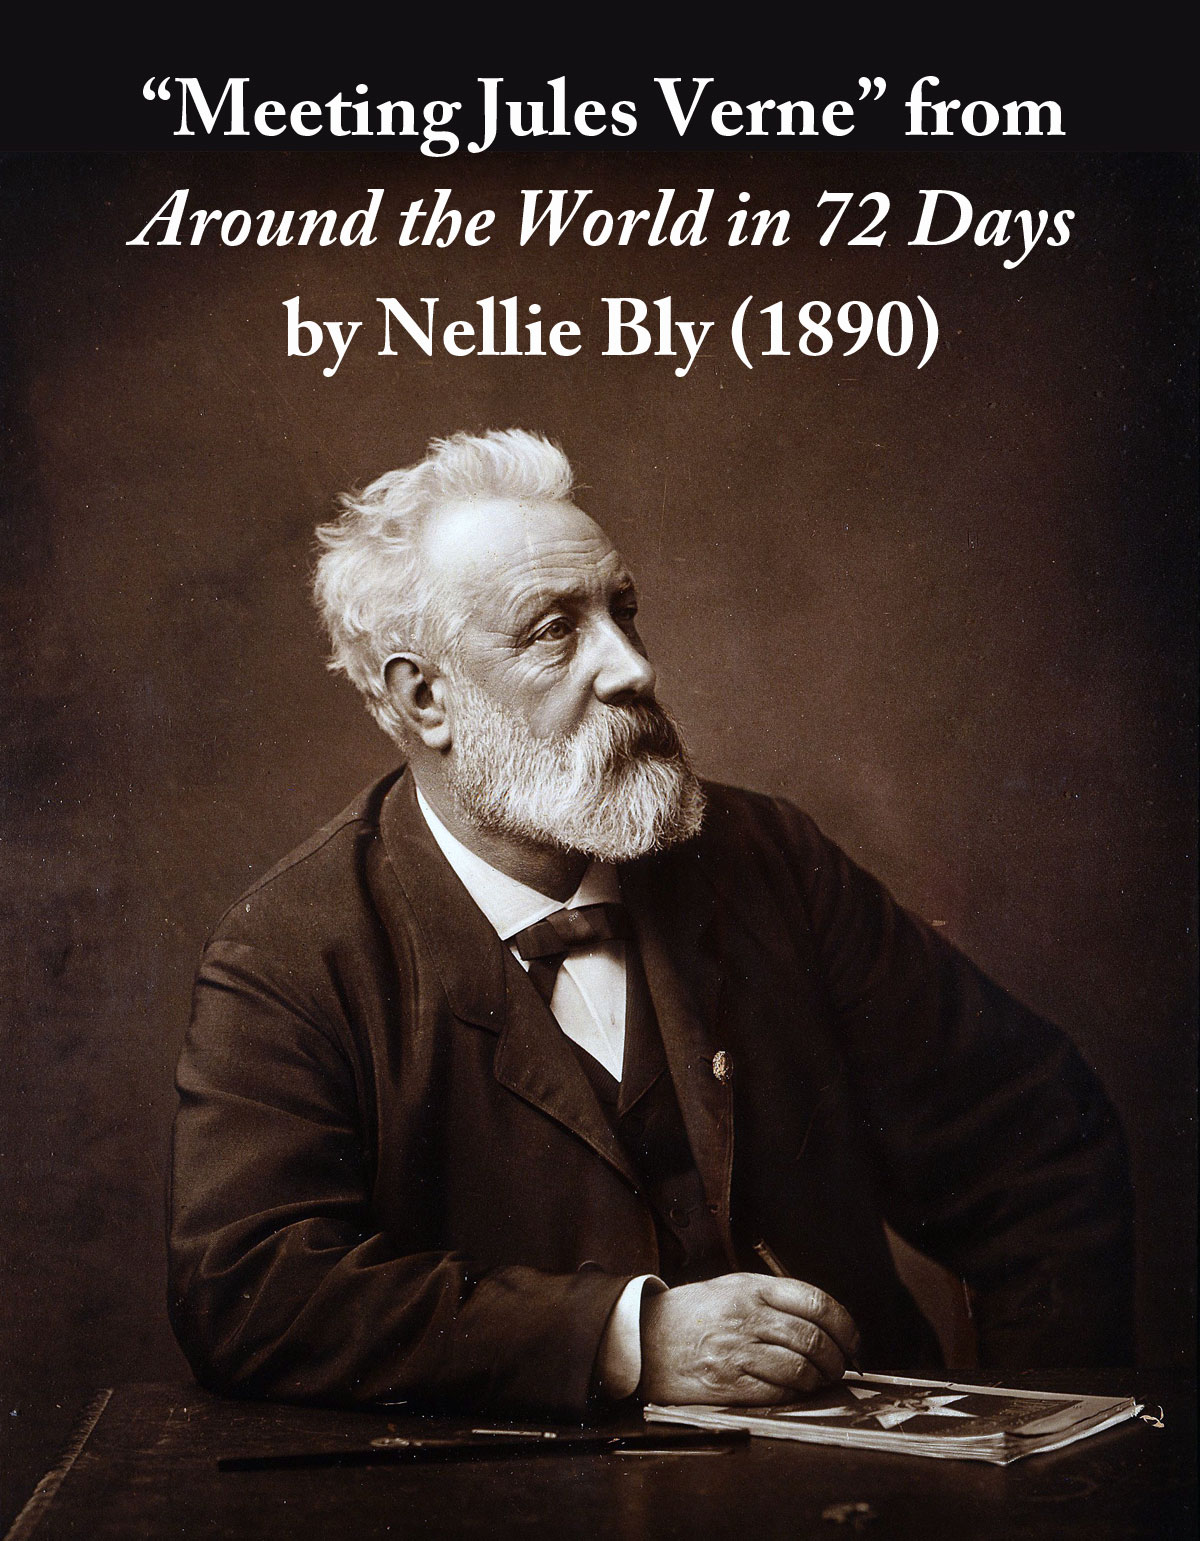 Meeting Jules Verne from Around the World in 72 Days by Nellie Bly (1890)